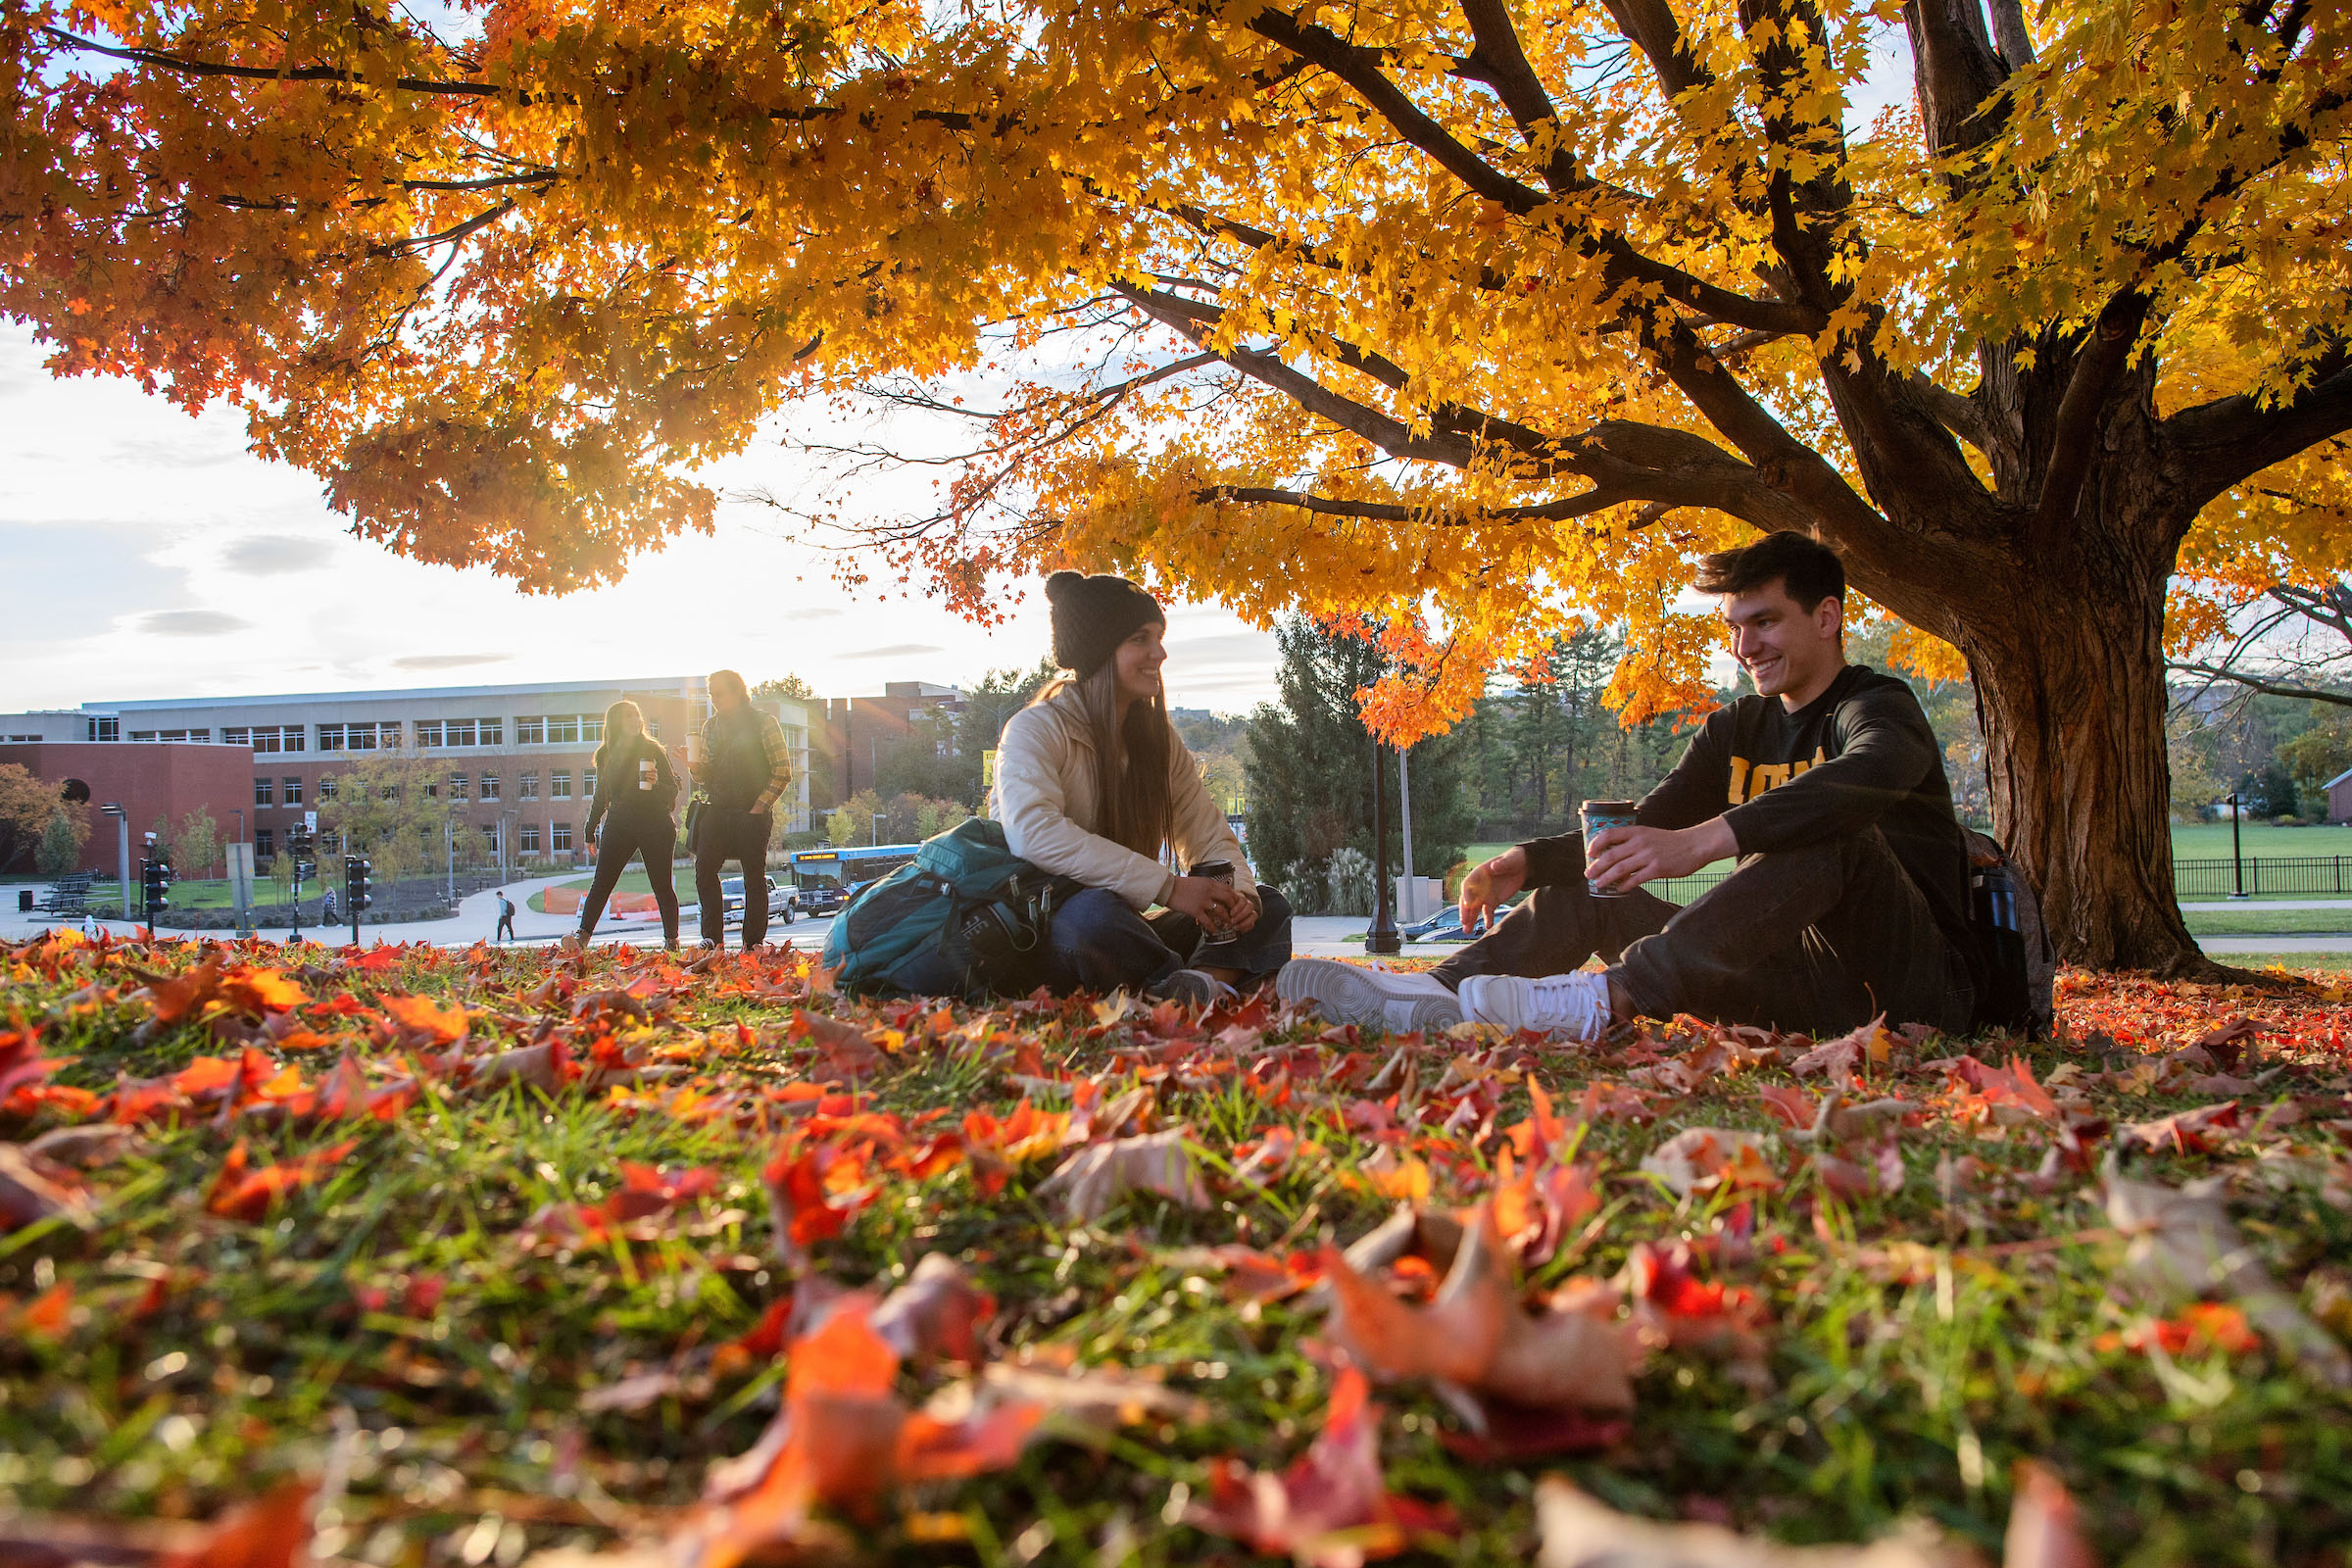 Two students sit on the Old Capitol lawn amidst fallen leaves.